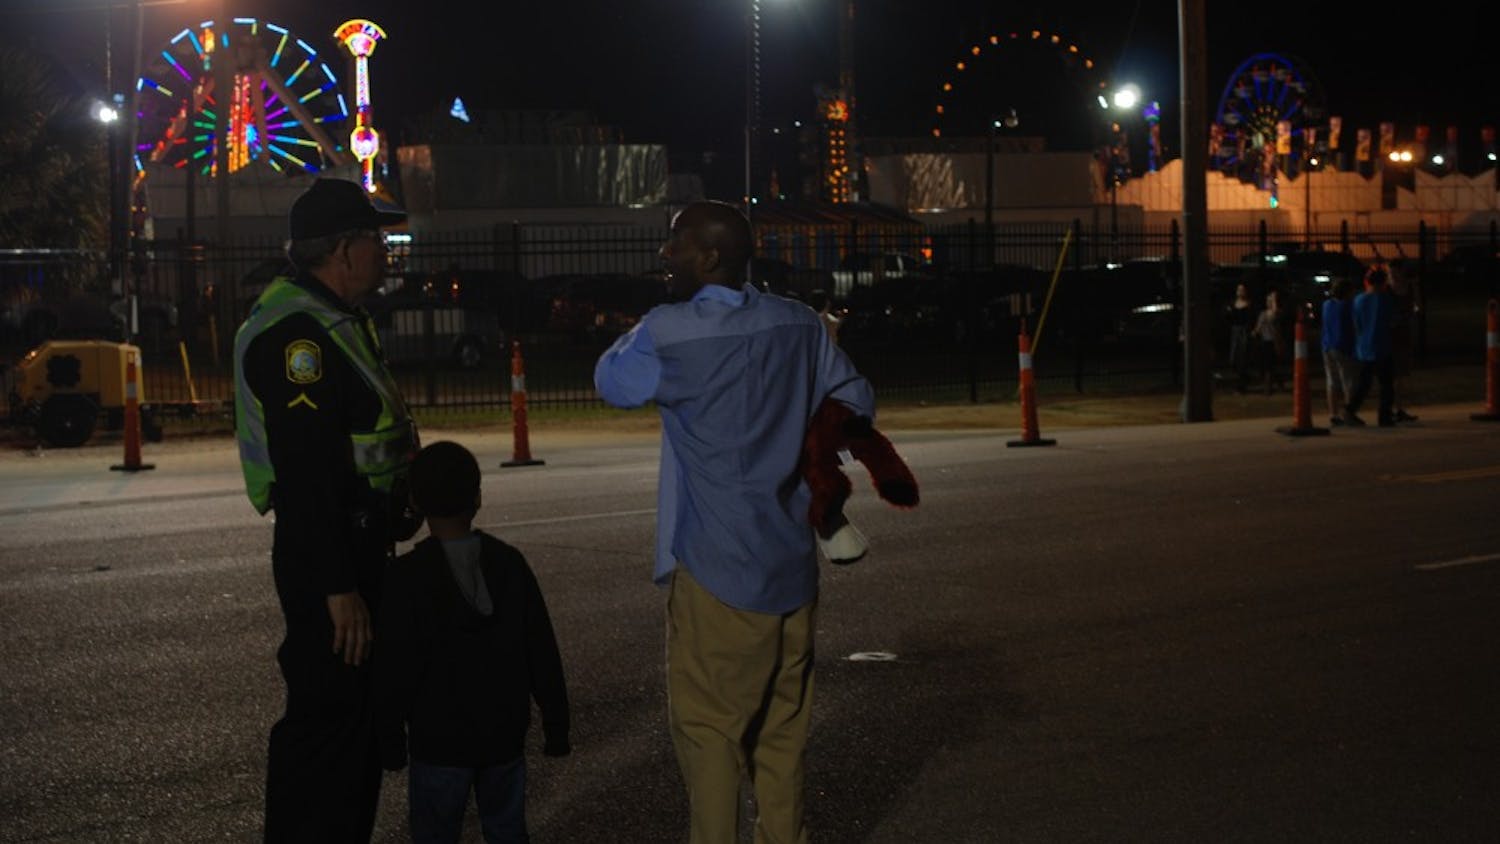 The fair closed early because of the shooting Saturday evening and will resume regular hours  on Sunday.